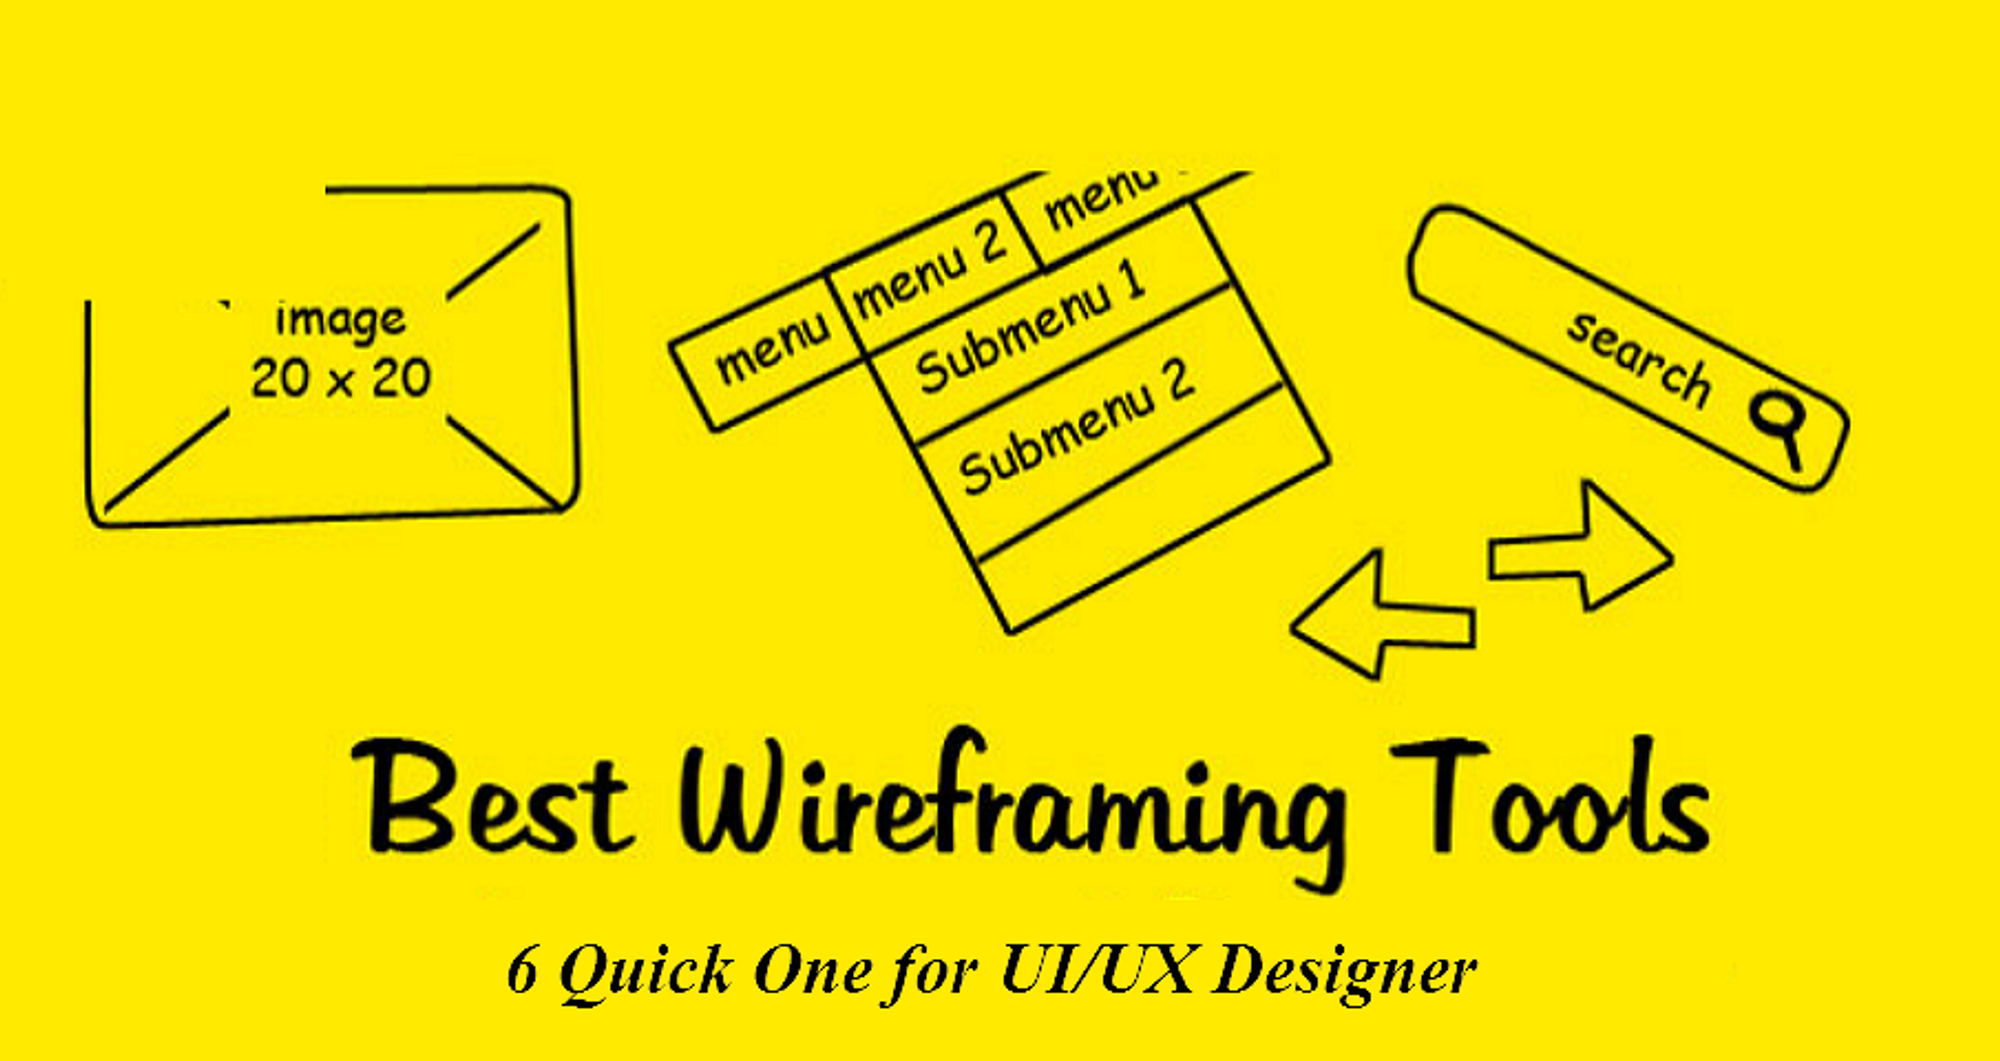 6 Free Quick Wireframe Tools For UI/UX Designers in 2019